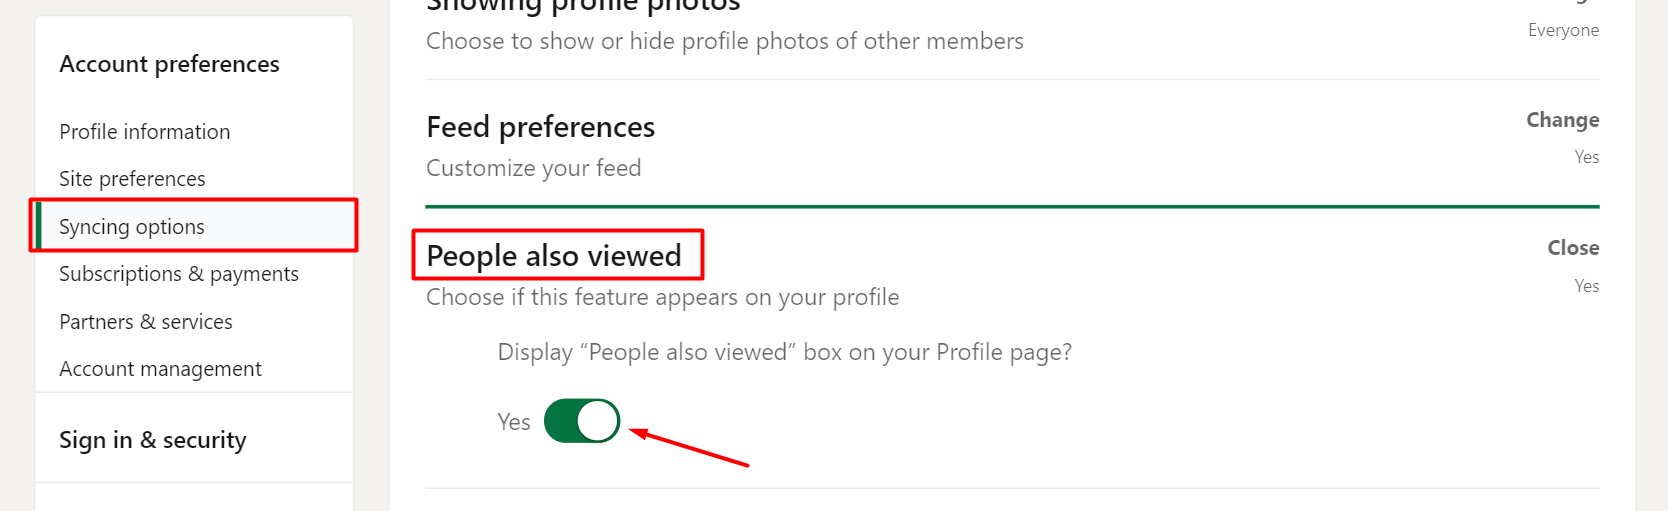 How to Enable/Disable the People Also Viewed Feature From Your LinkedIn Profile